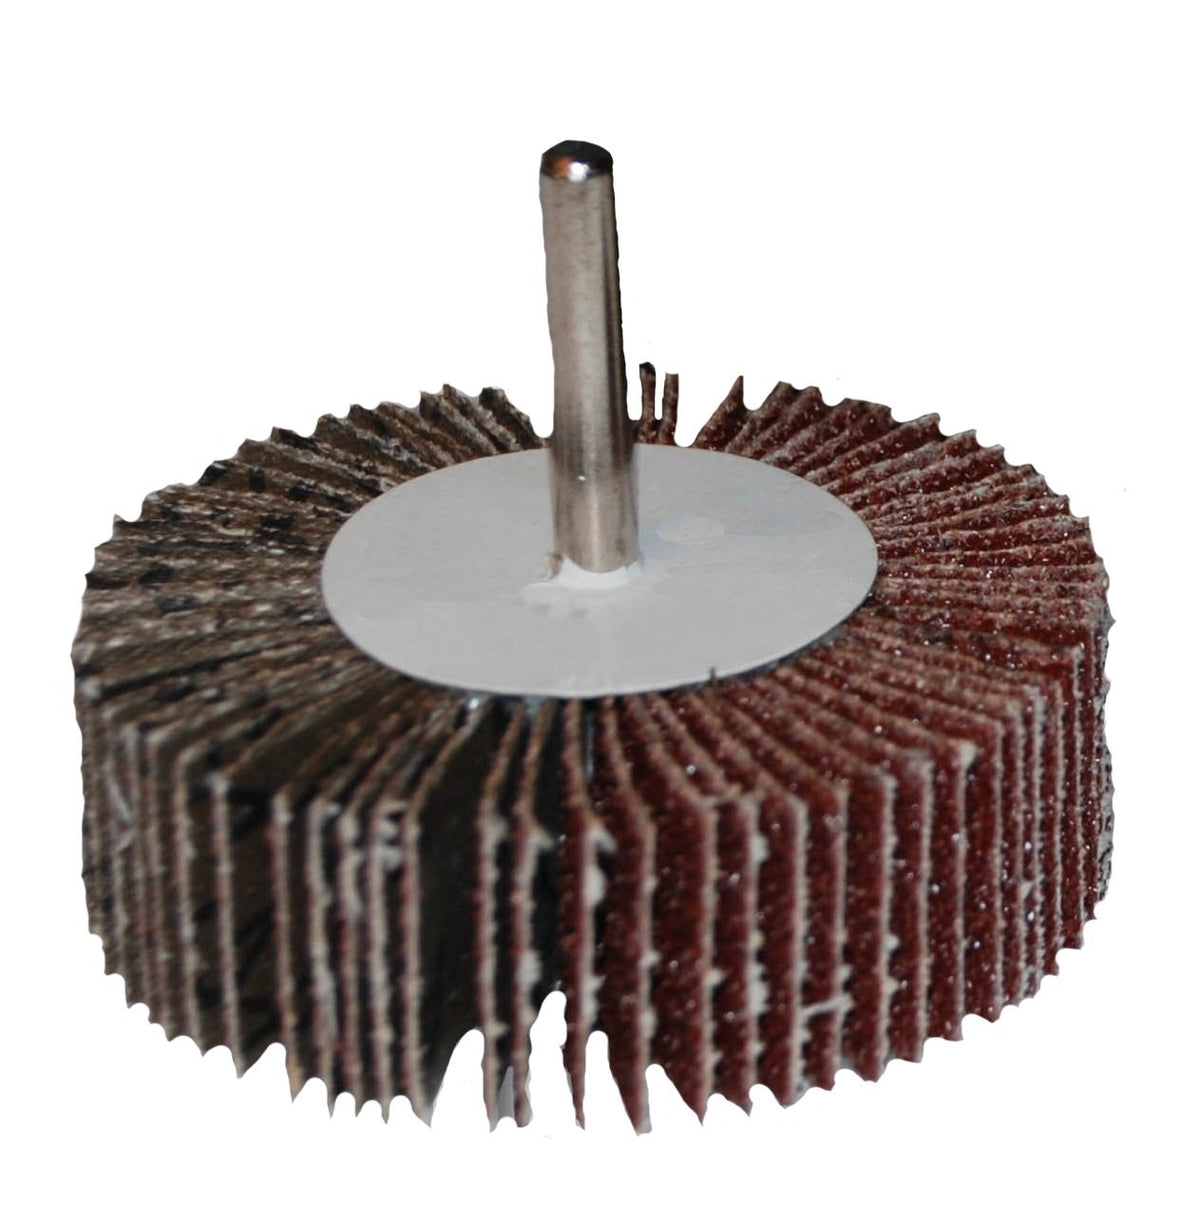 1", 1-1/2", 2", 2-1/2" & 3" (x 1" x 1/4") 40 to 120 Grit and 6" x 2" x 1" 60 Grit Unmounted Aluminum Oxide Flap Wheels